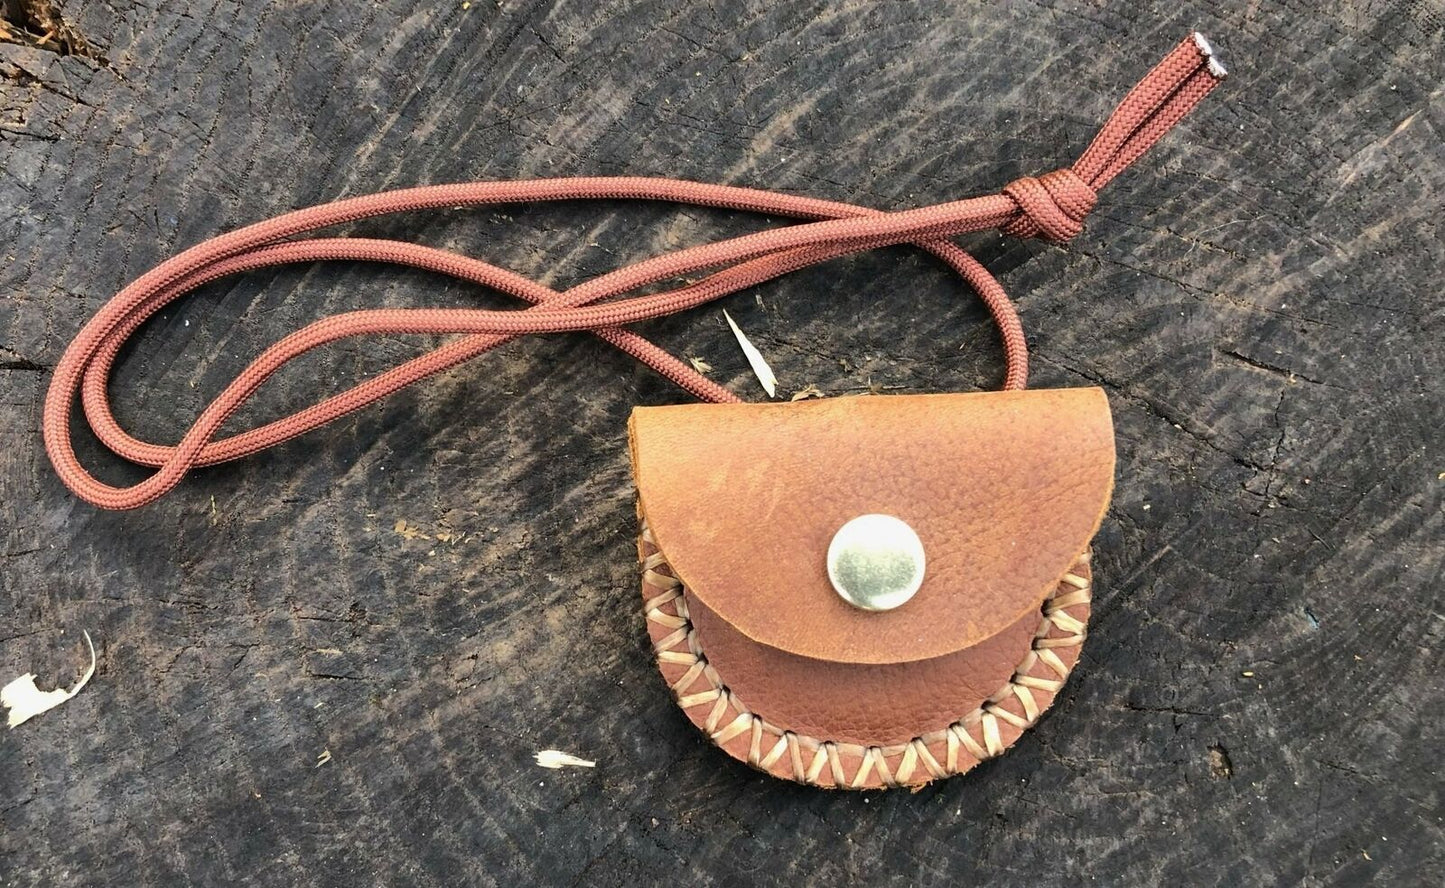 Bushcraft solar lens and quality handmade leather pouch